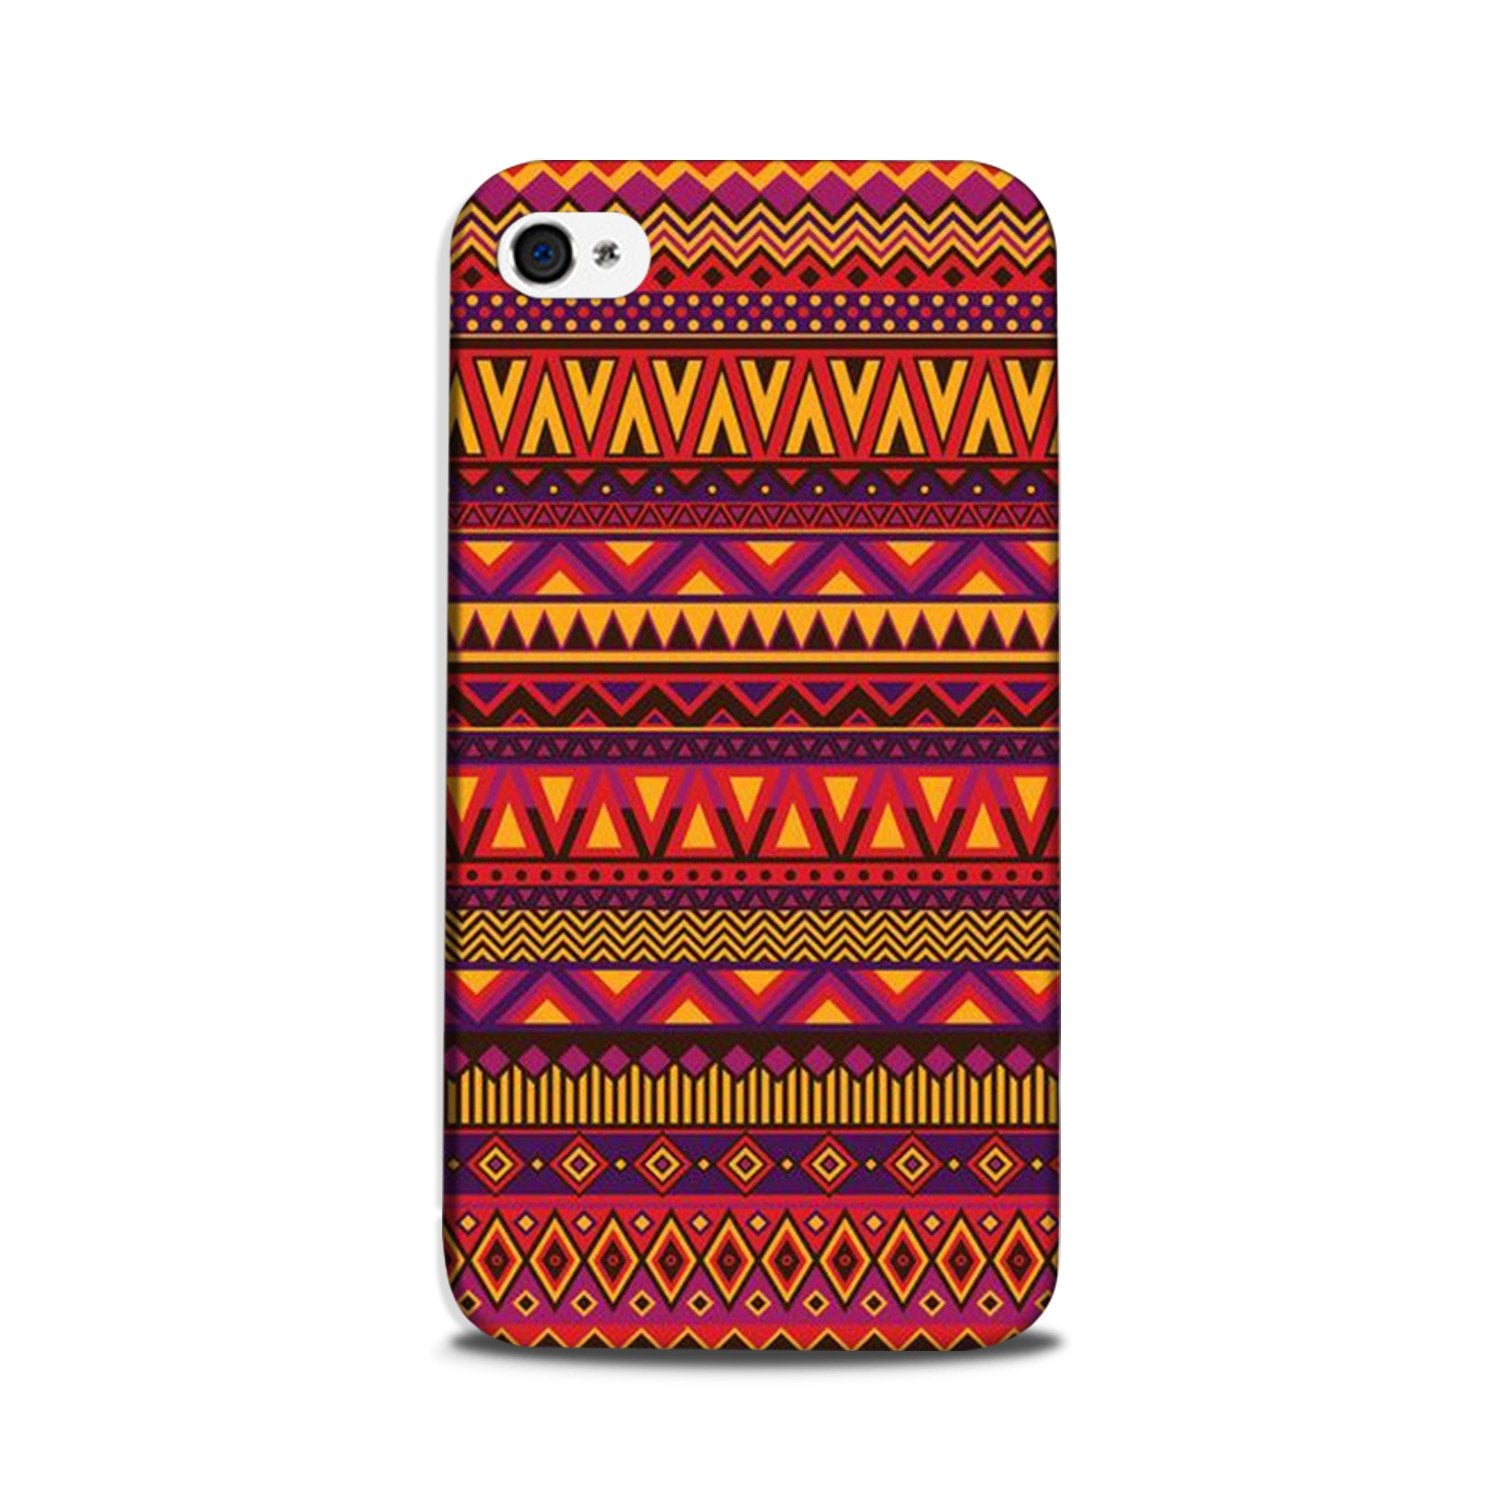 Zigzag line pattern2 Case for iPhone 5/ 5s